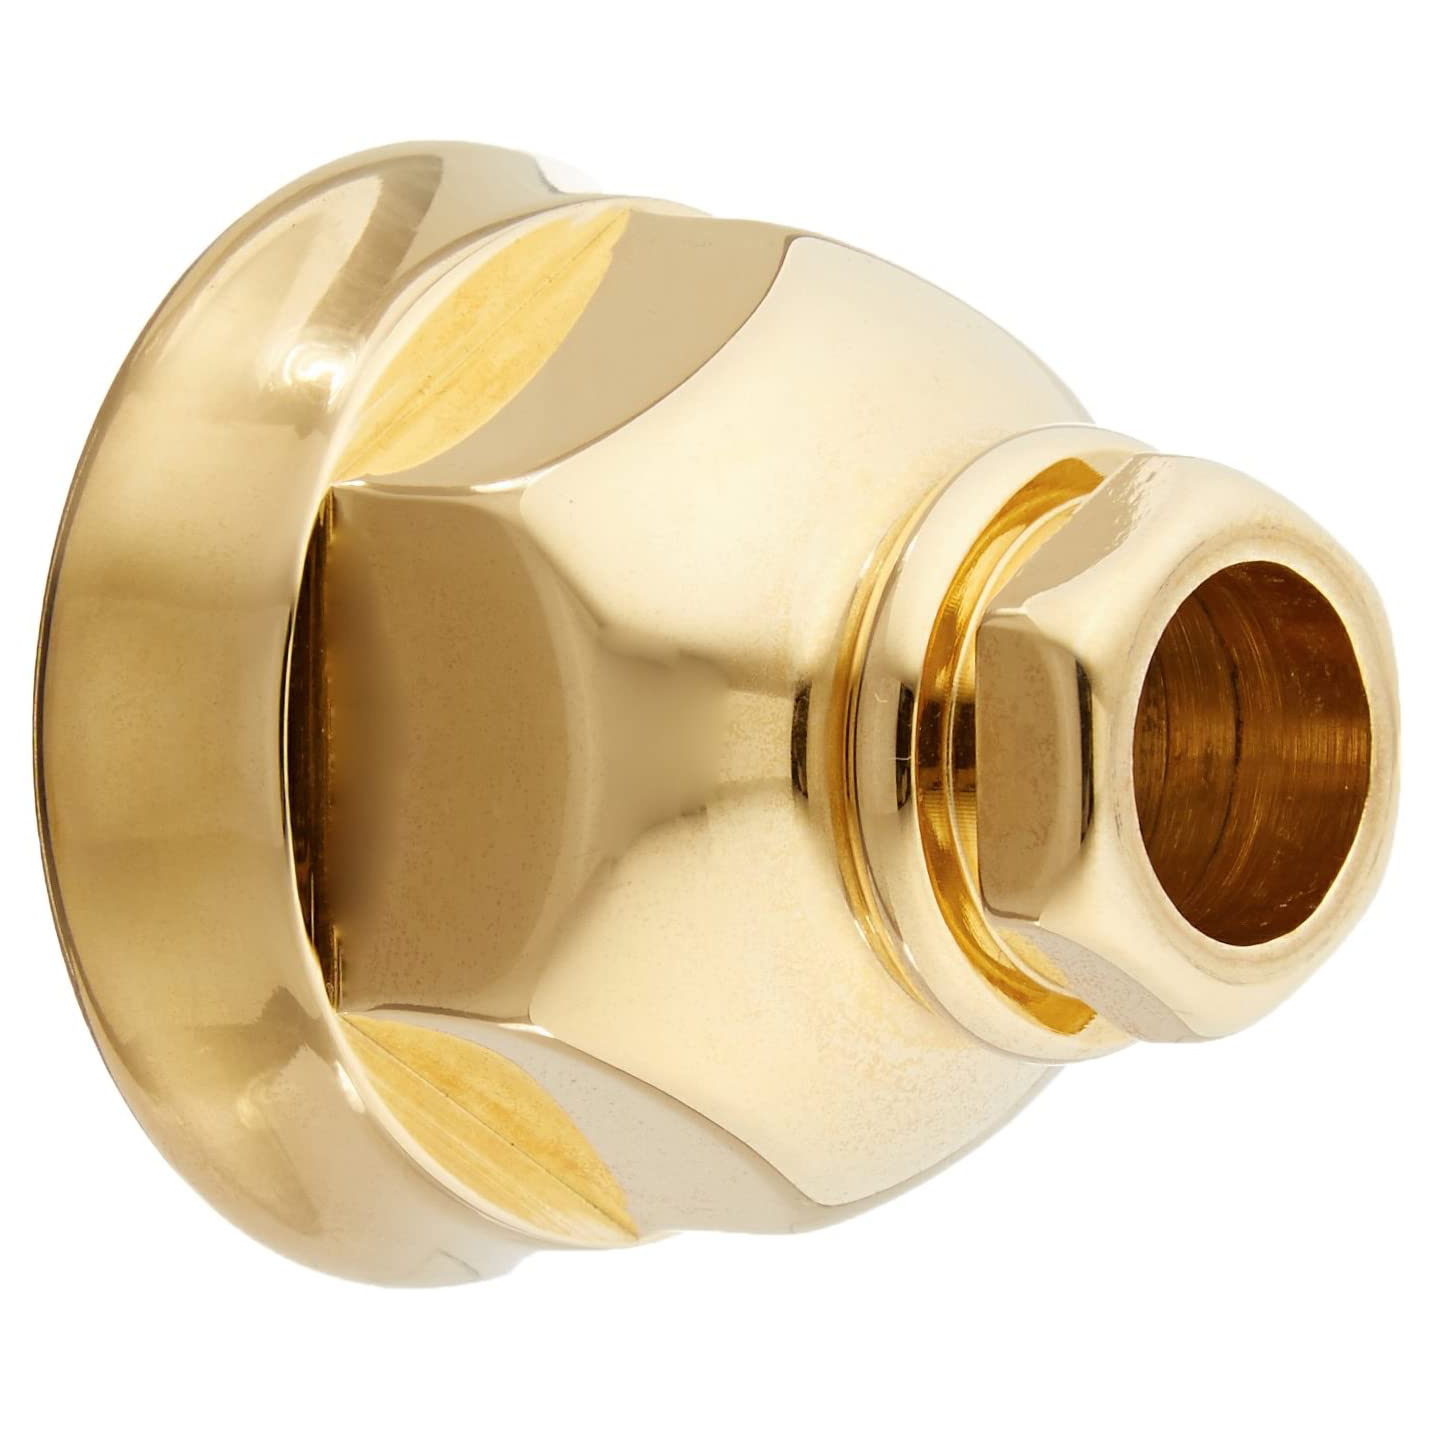 Country Bath Bell Housing for 3/4" Tub Fillers in Inca Brass